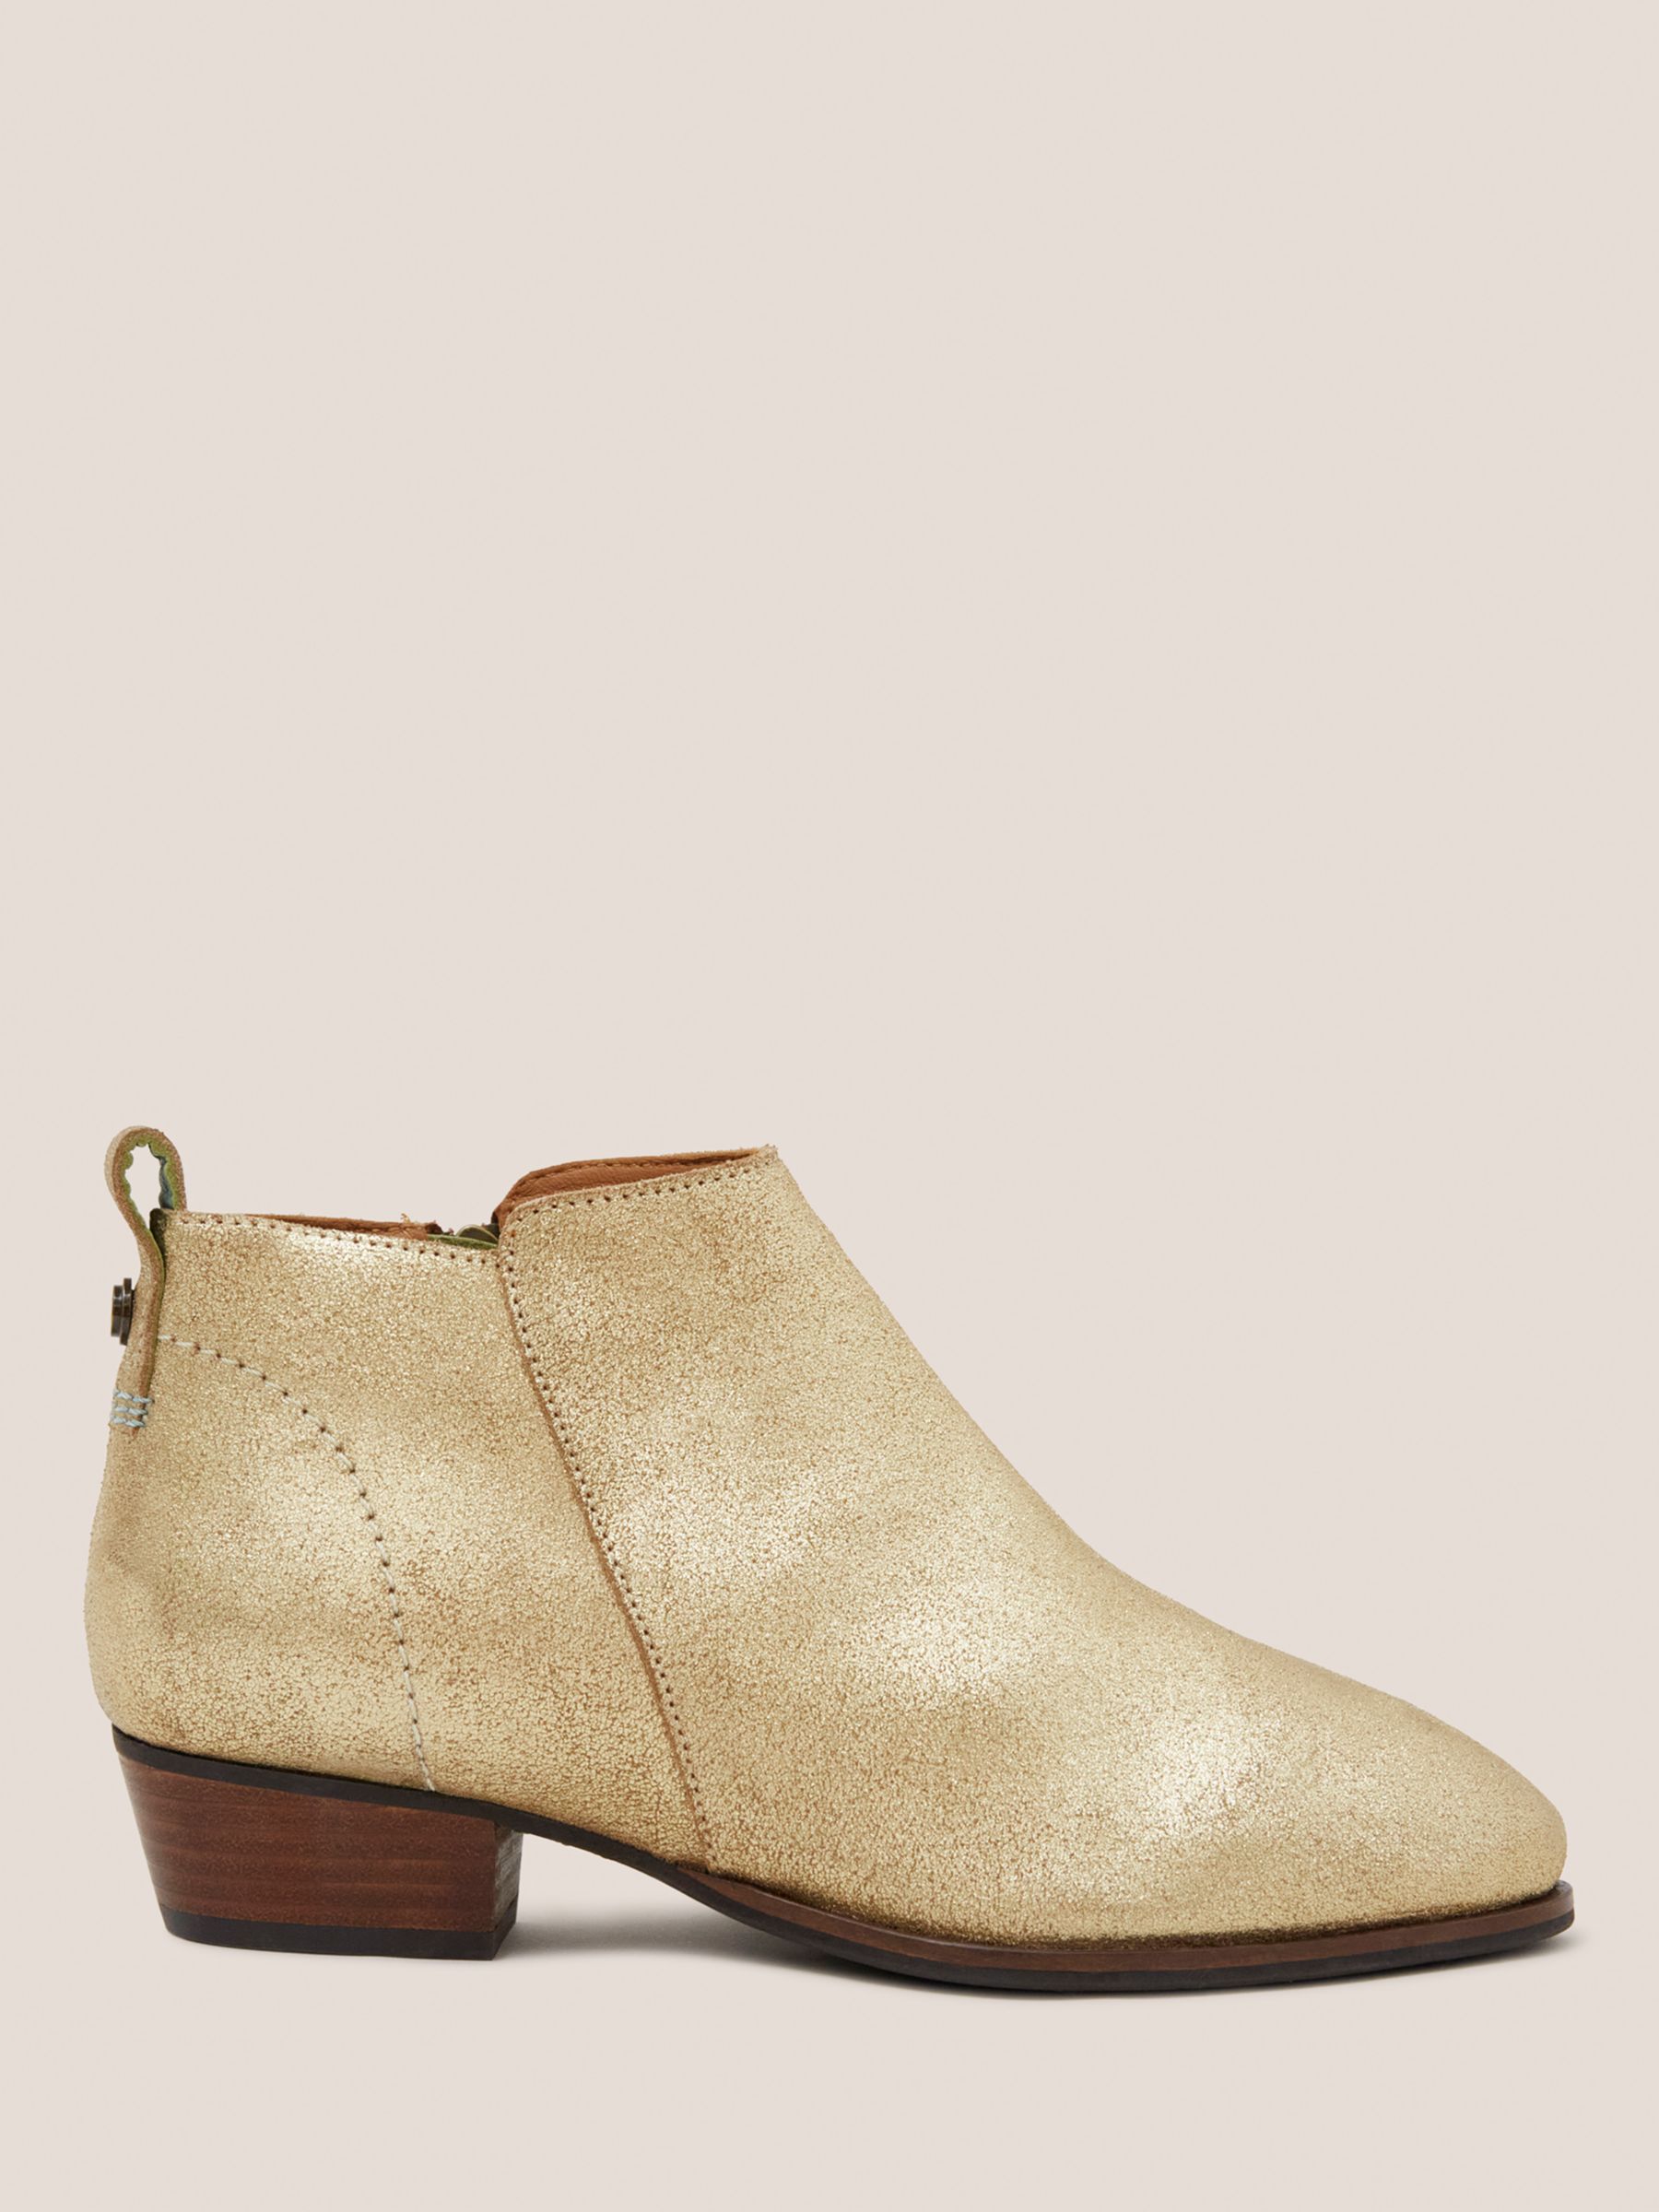 White Stuff Willow Leather Ankle Boots, Gold at John Lewis & Partners